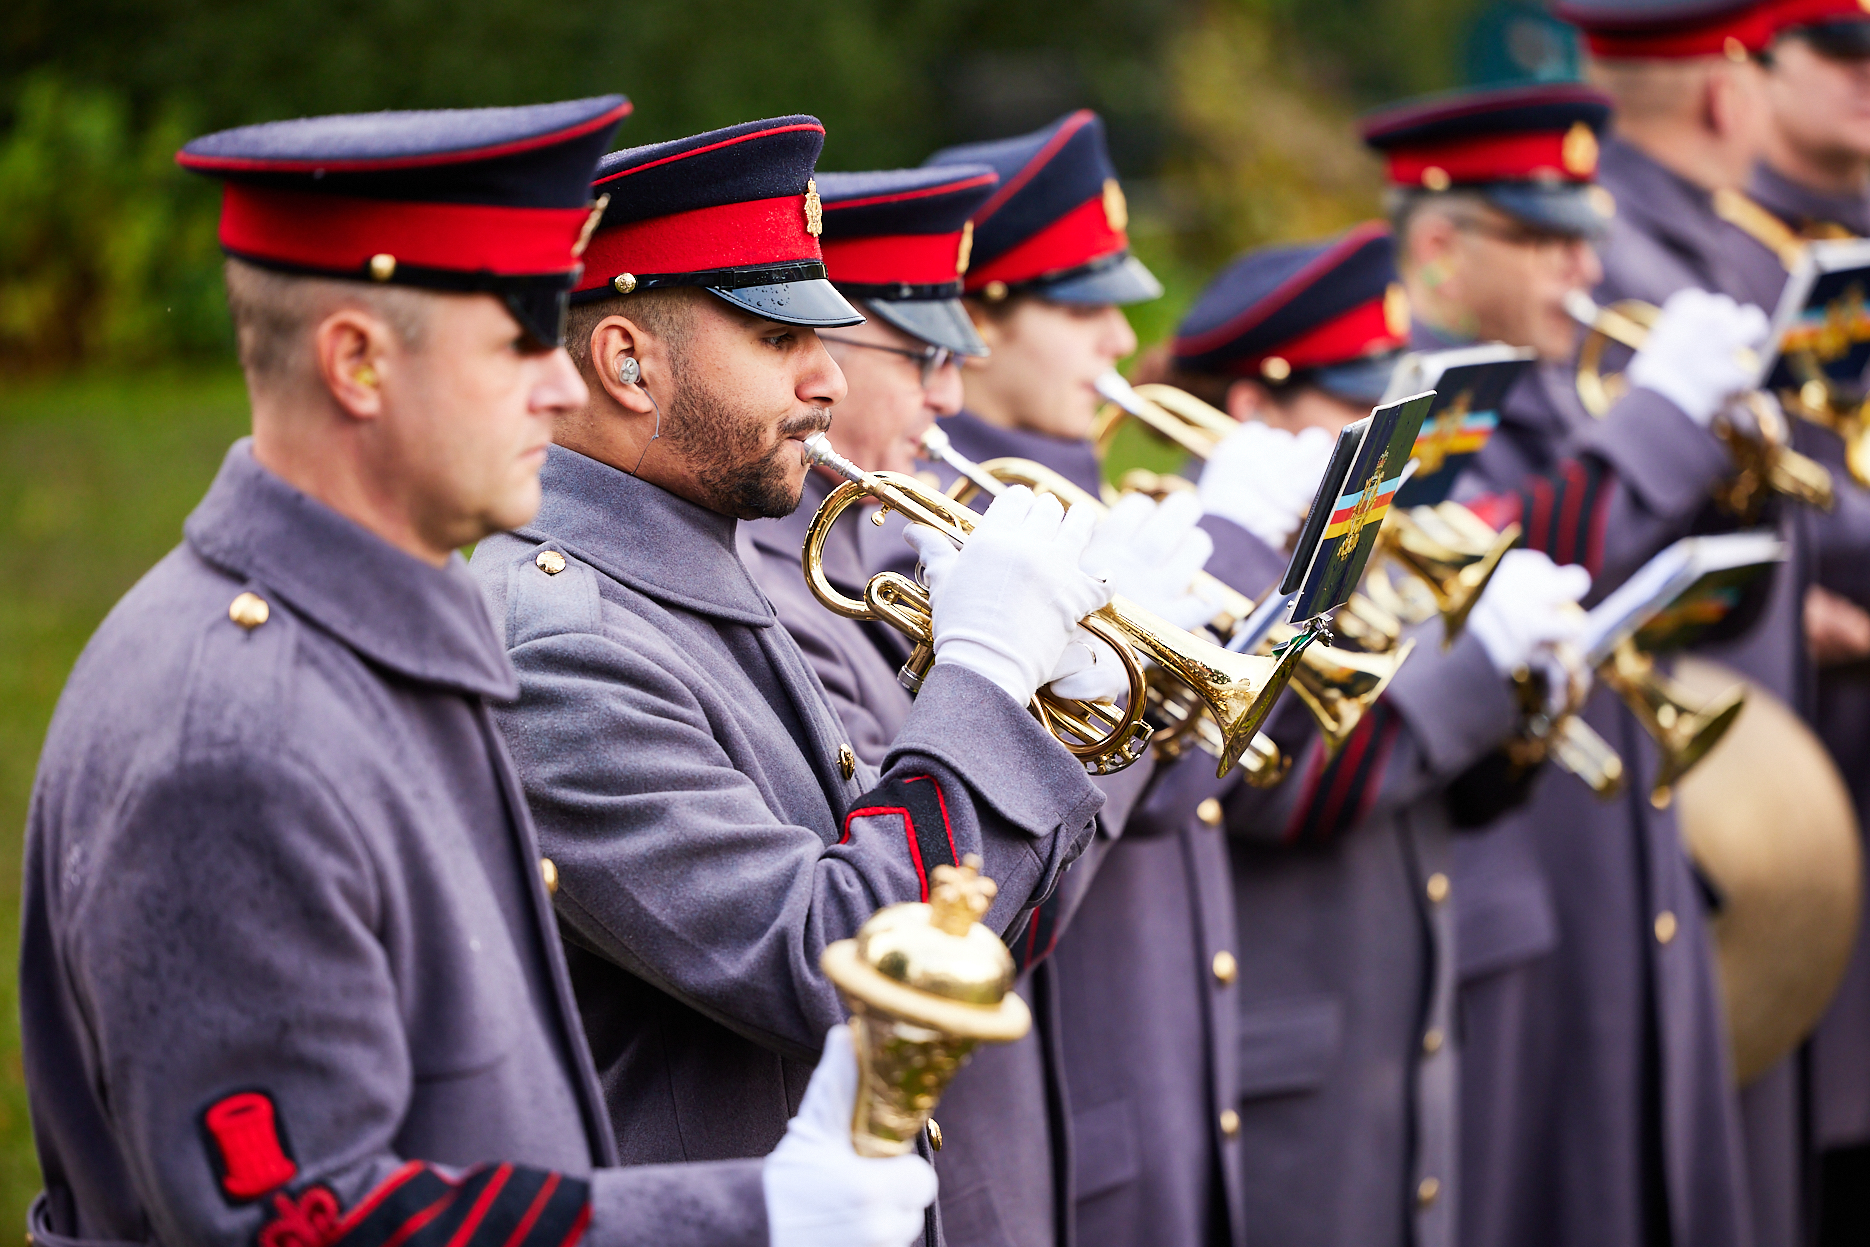 musicians in uniform playing their instruments